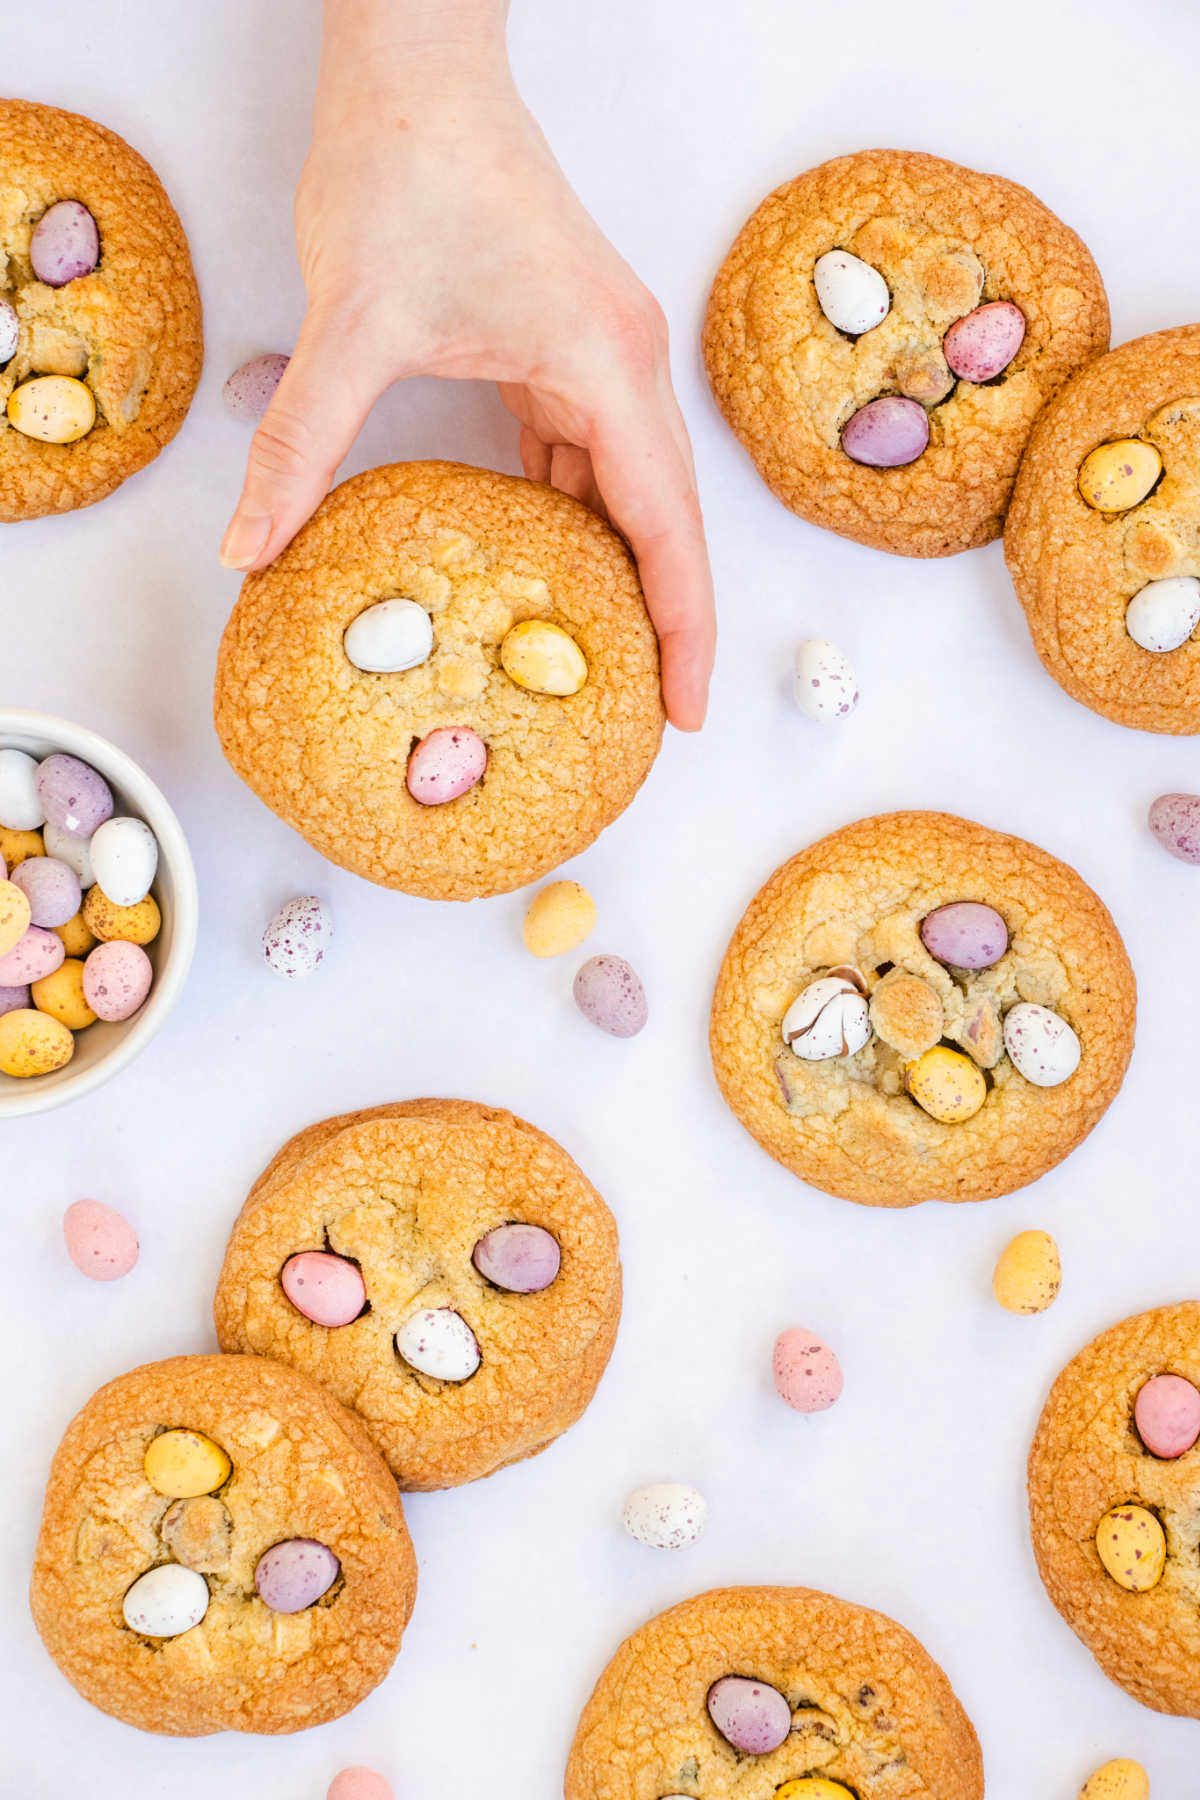 Hand holding large golden brown cookie with mini chocolate eggs on top.